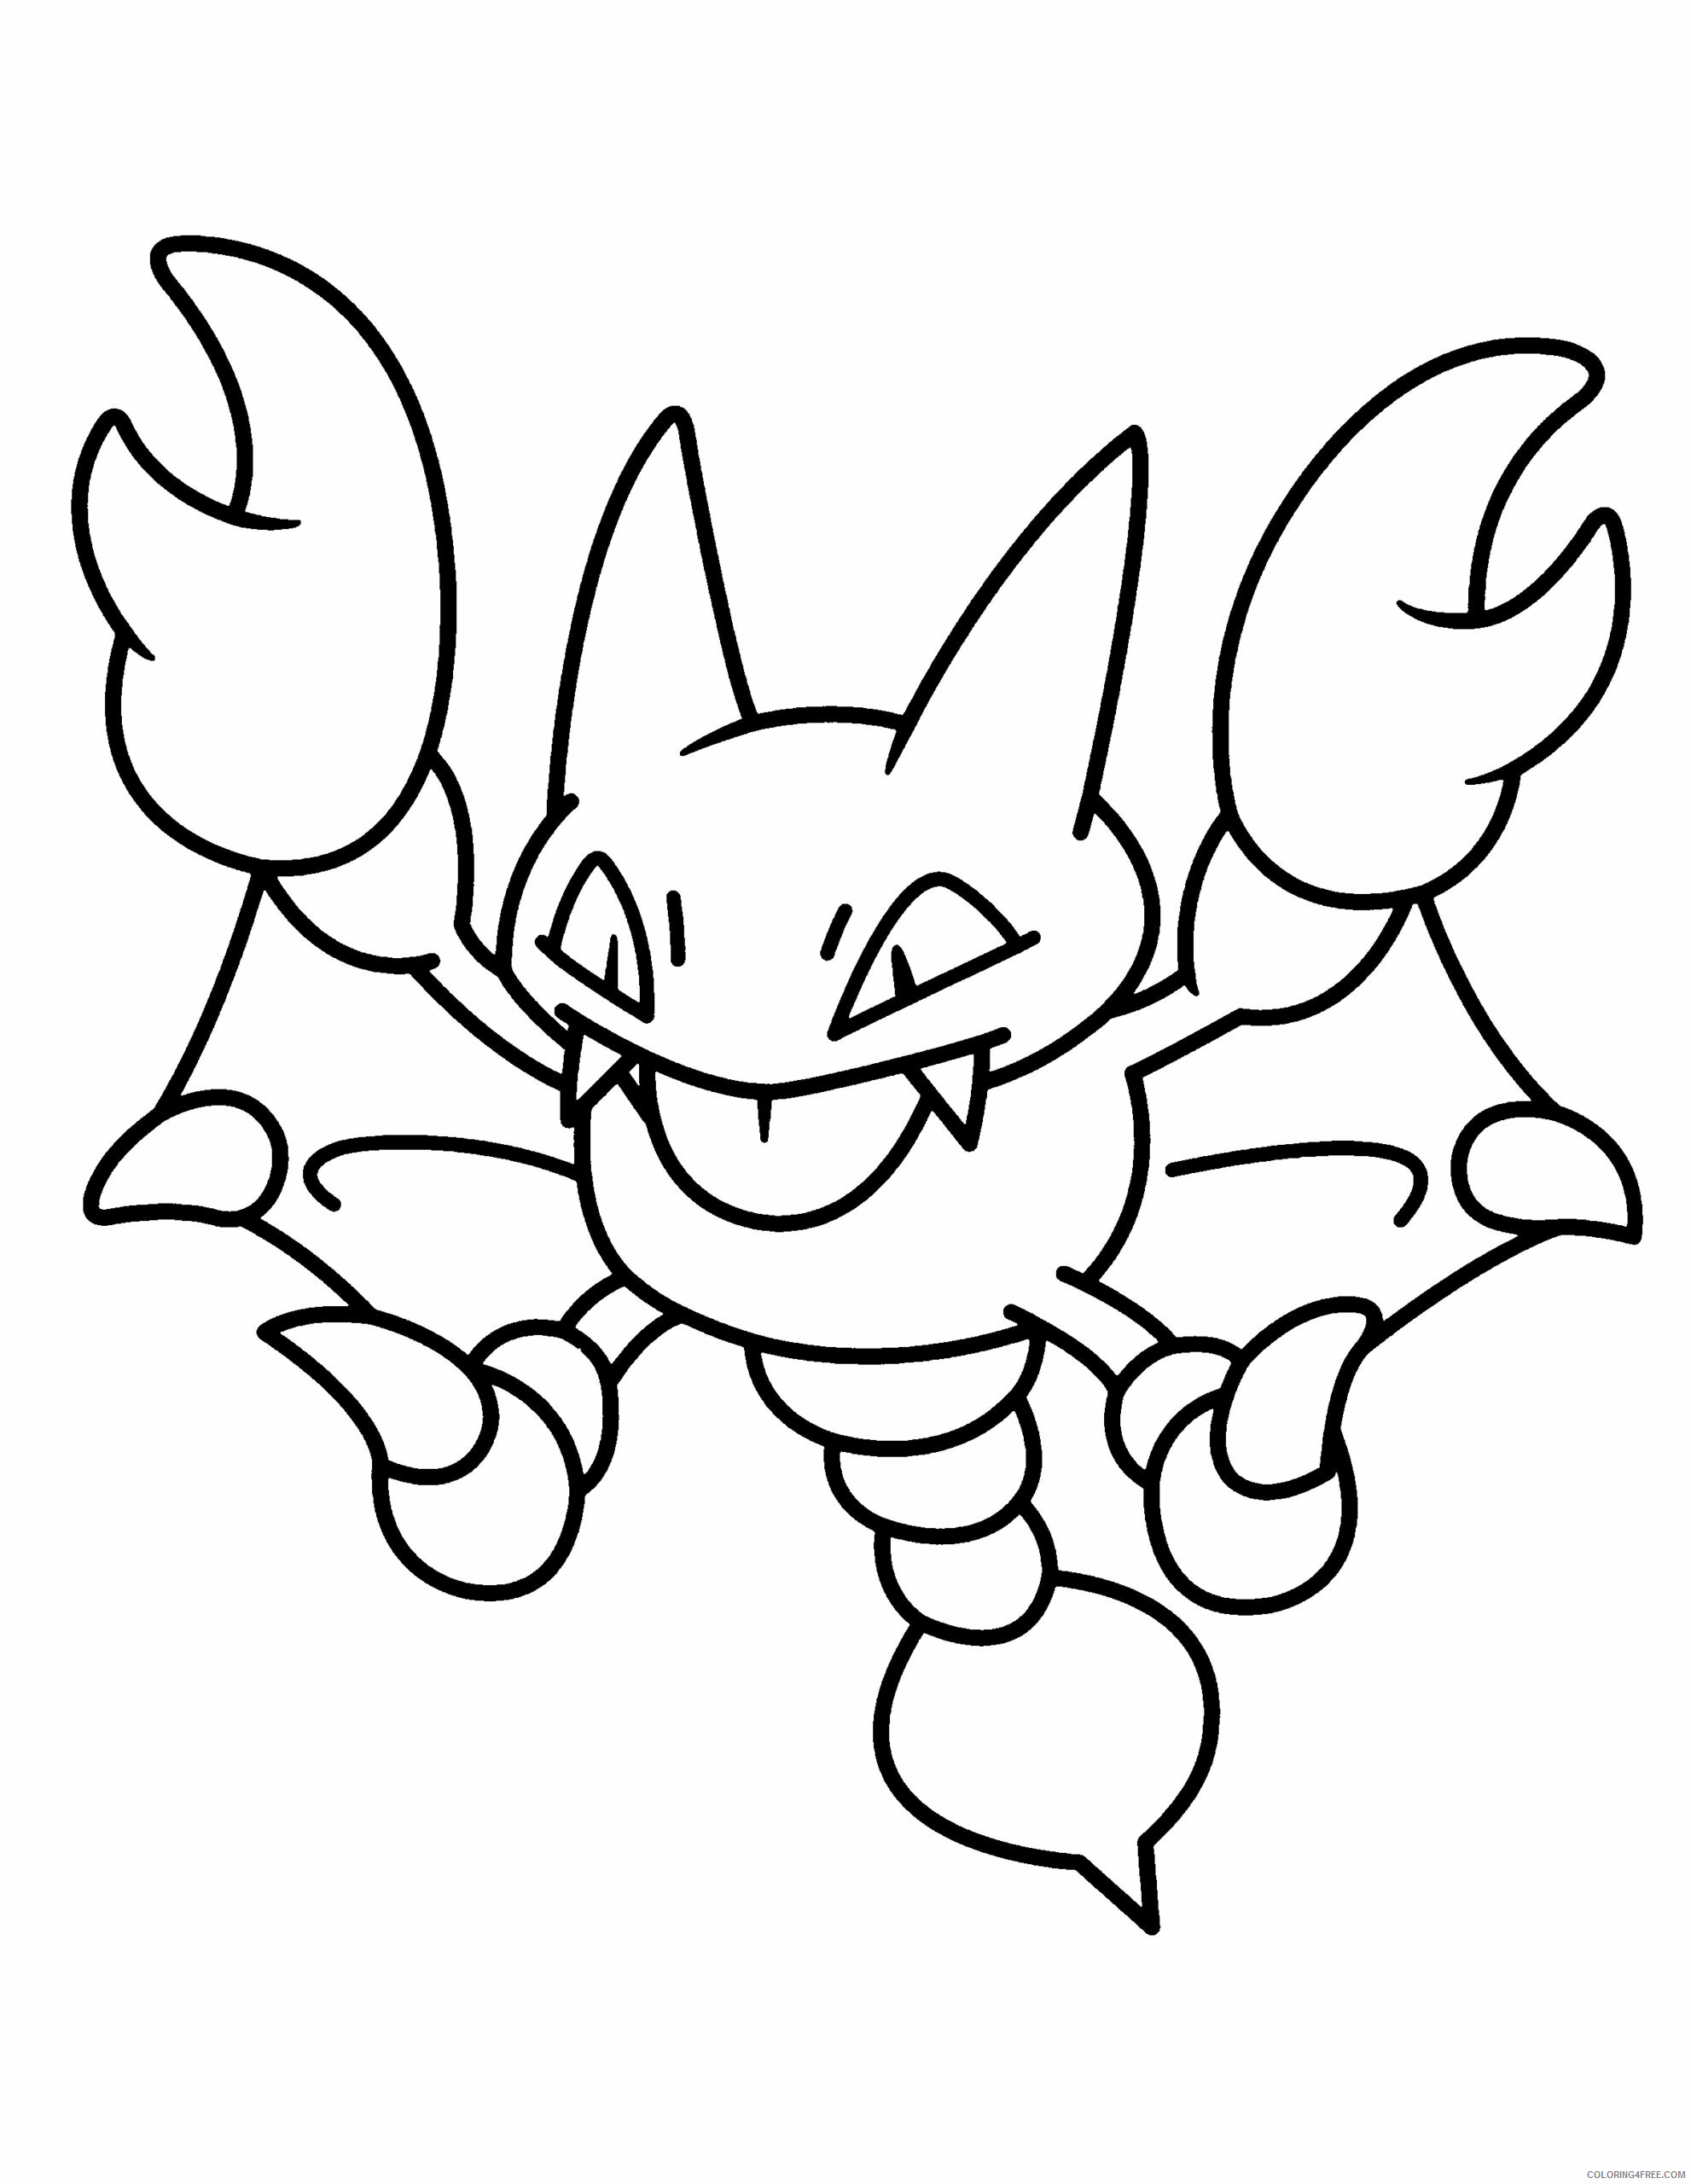 Pokemon Diamond and Pearl Coloring Pages Games Printable 2021 0883 Coloring4free